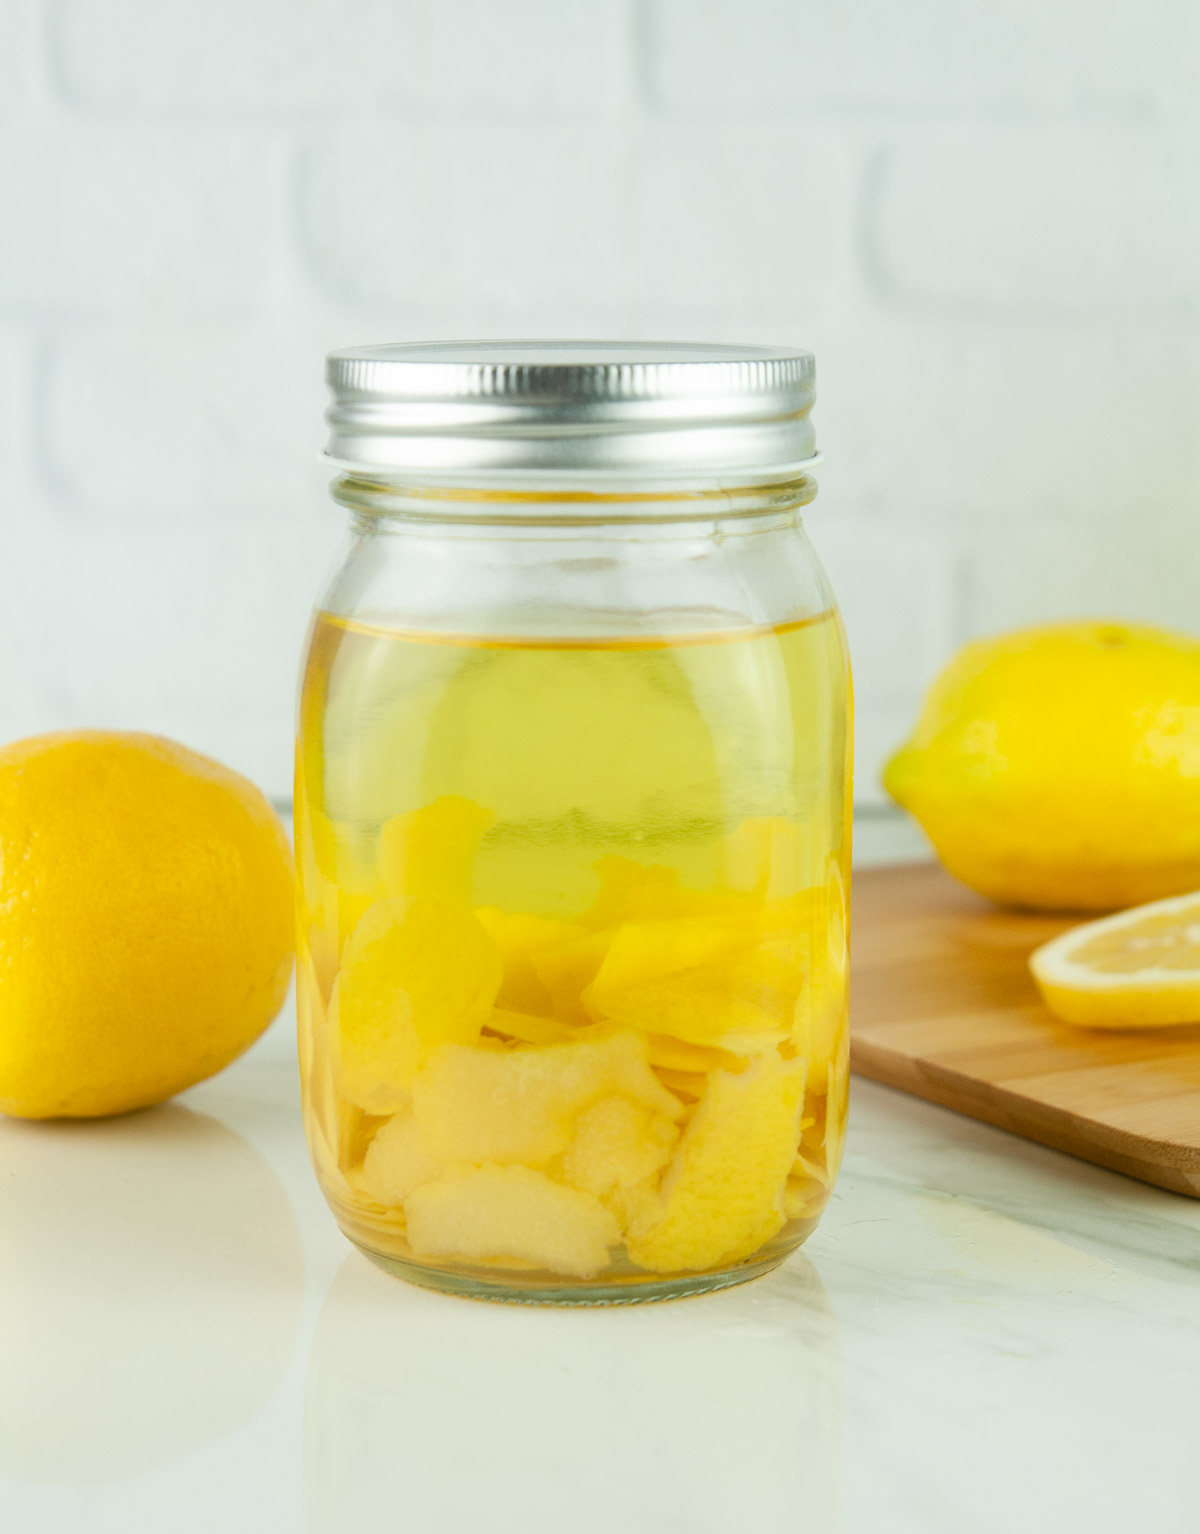 Homemade limoncello turns yellow as it sits and infuses the alcohol with its citrus flavor.